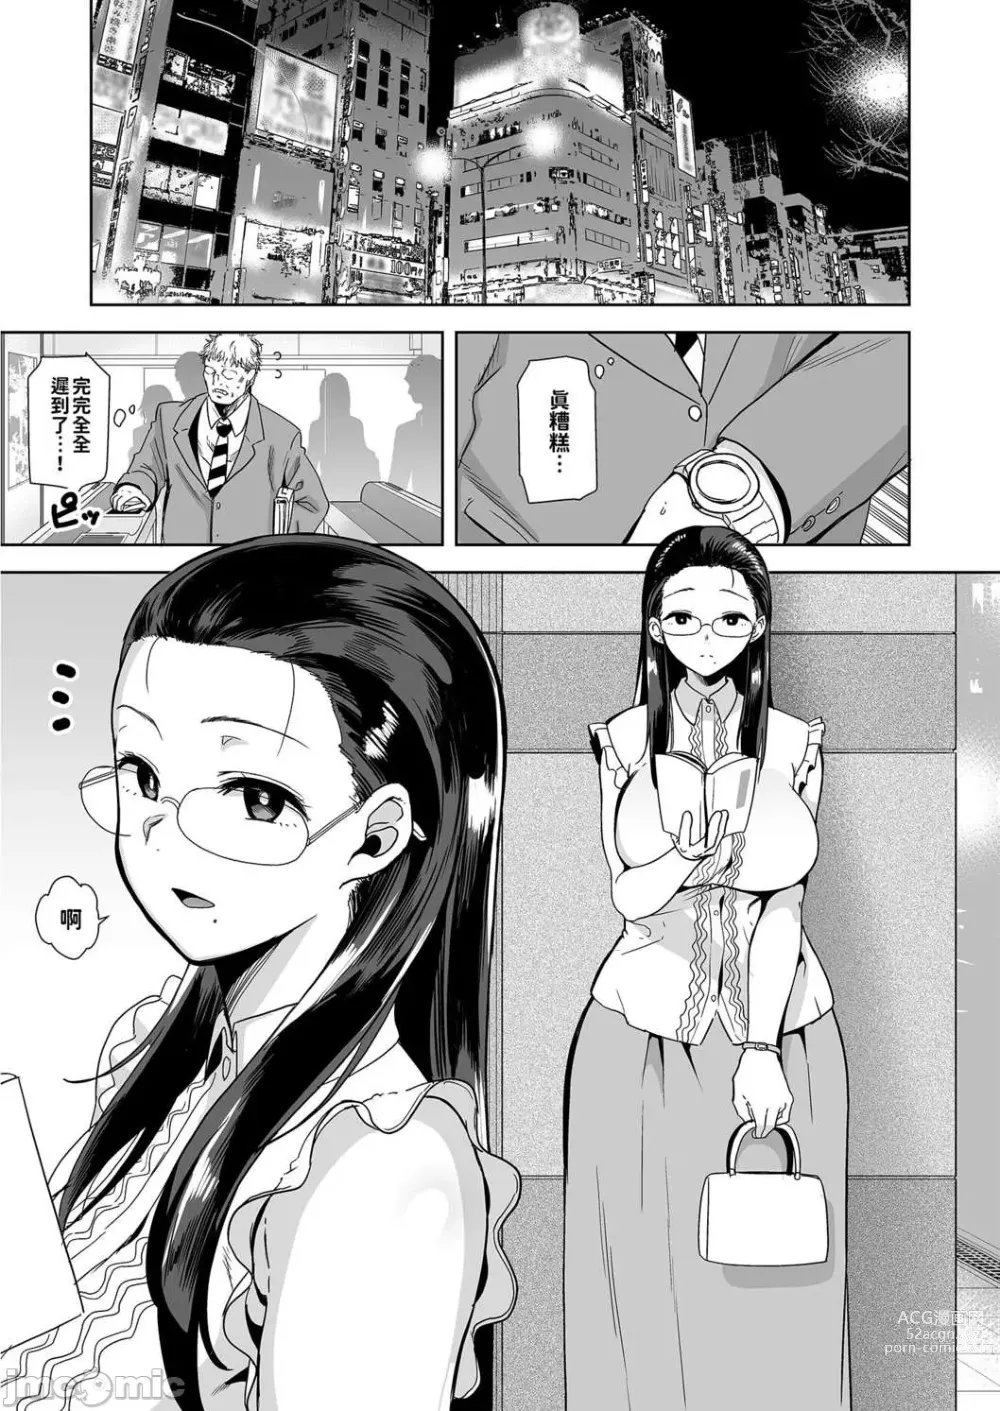 Page 4 of manga Seika Jogakuin High School Official Rod Uncle